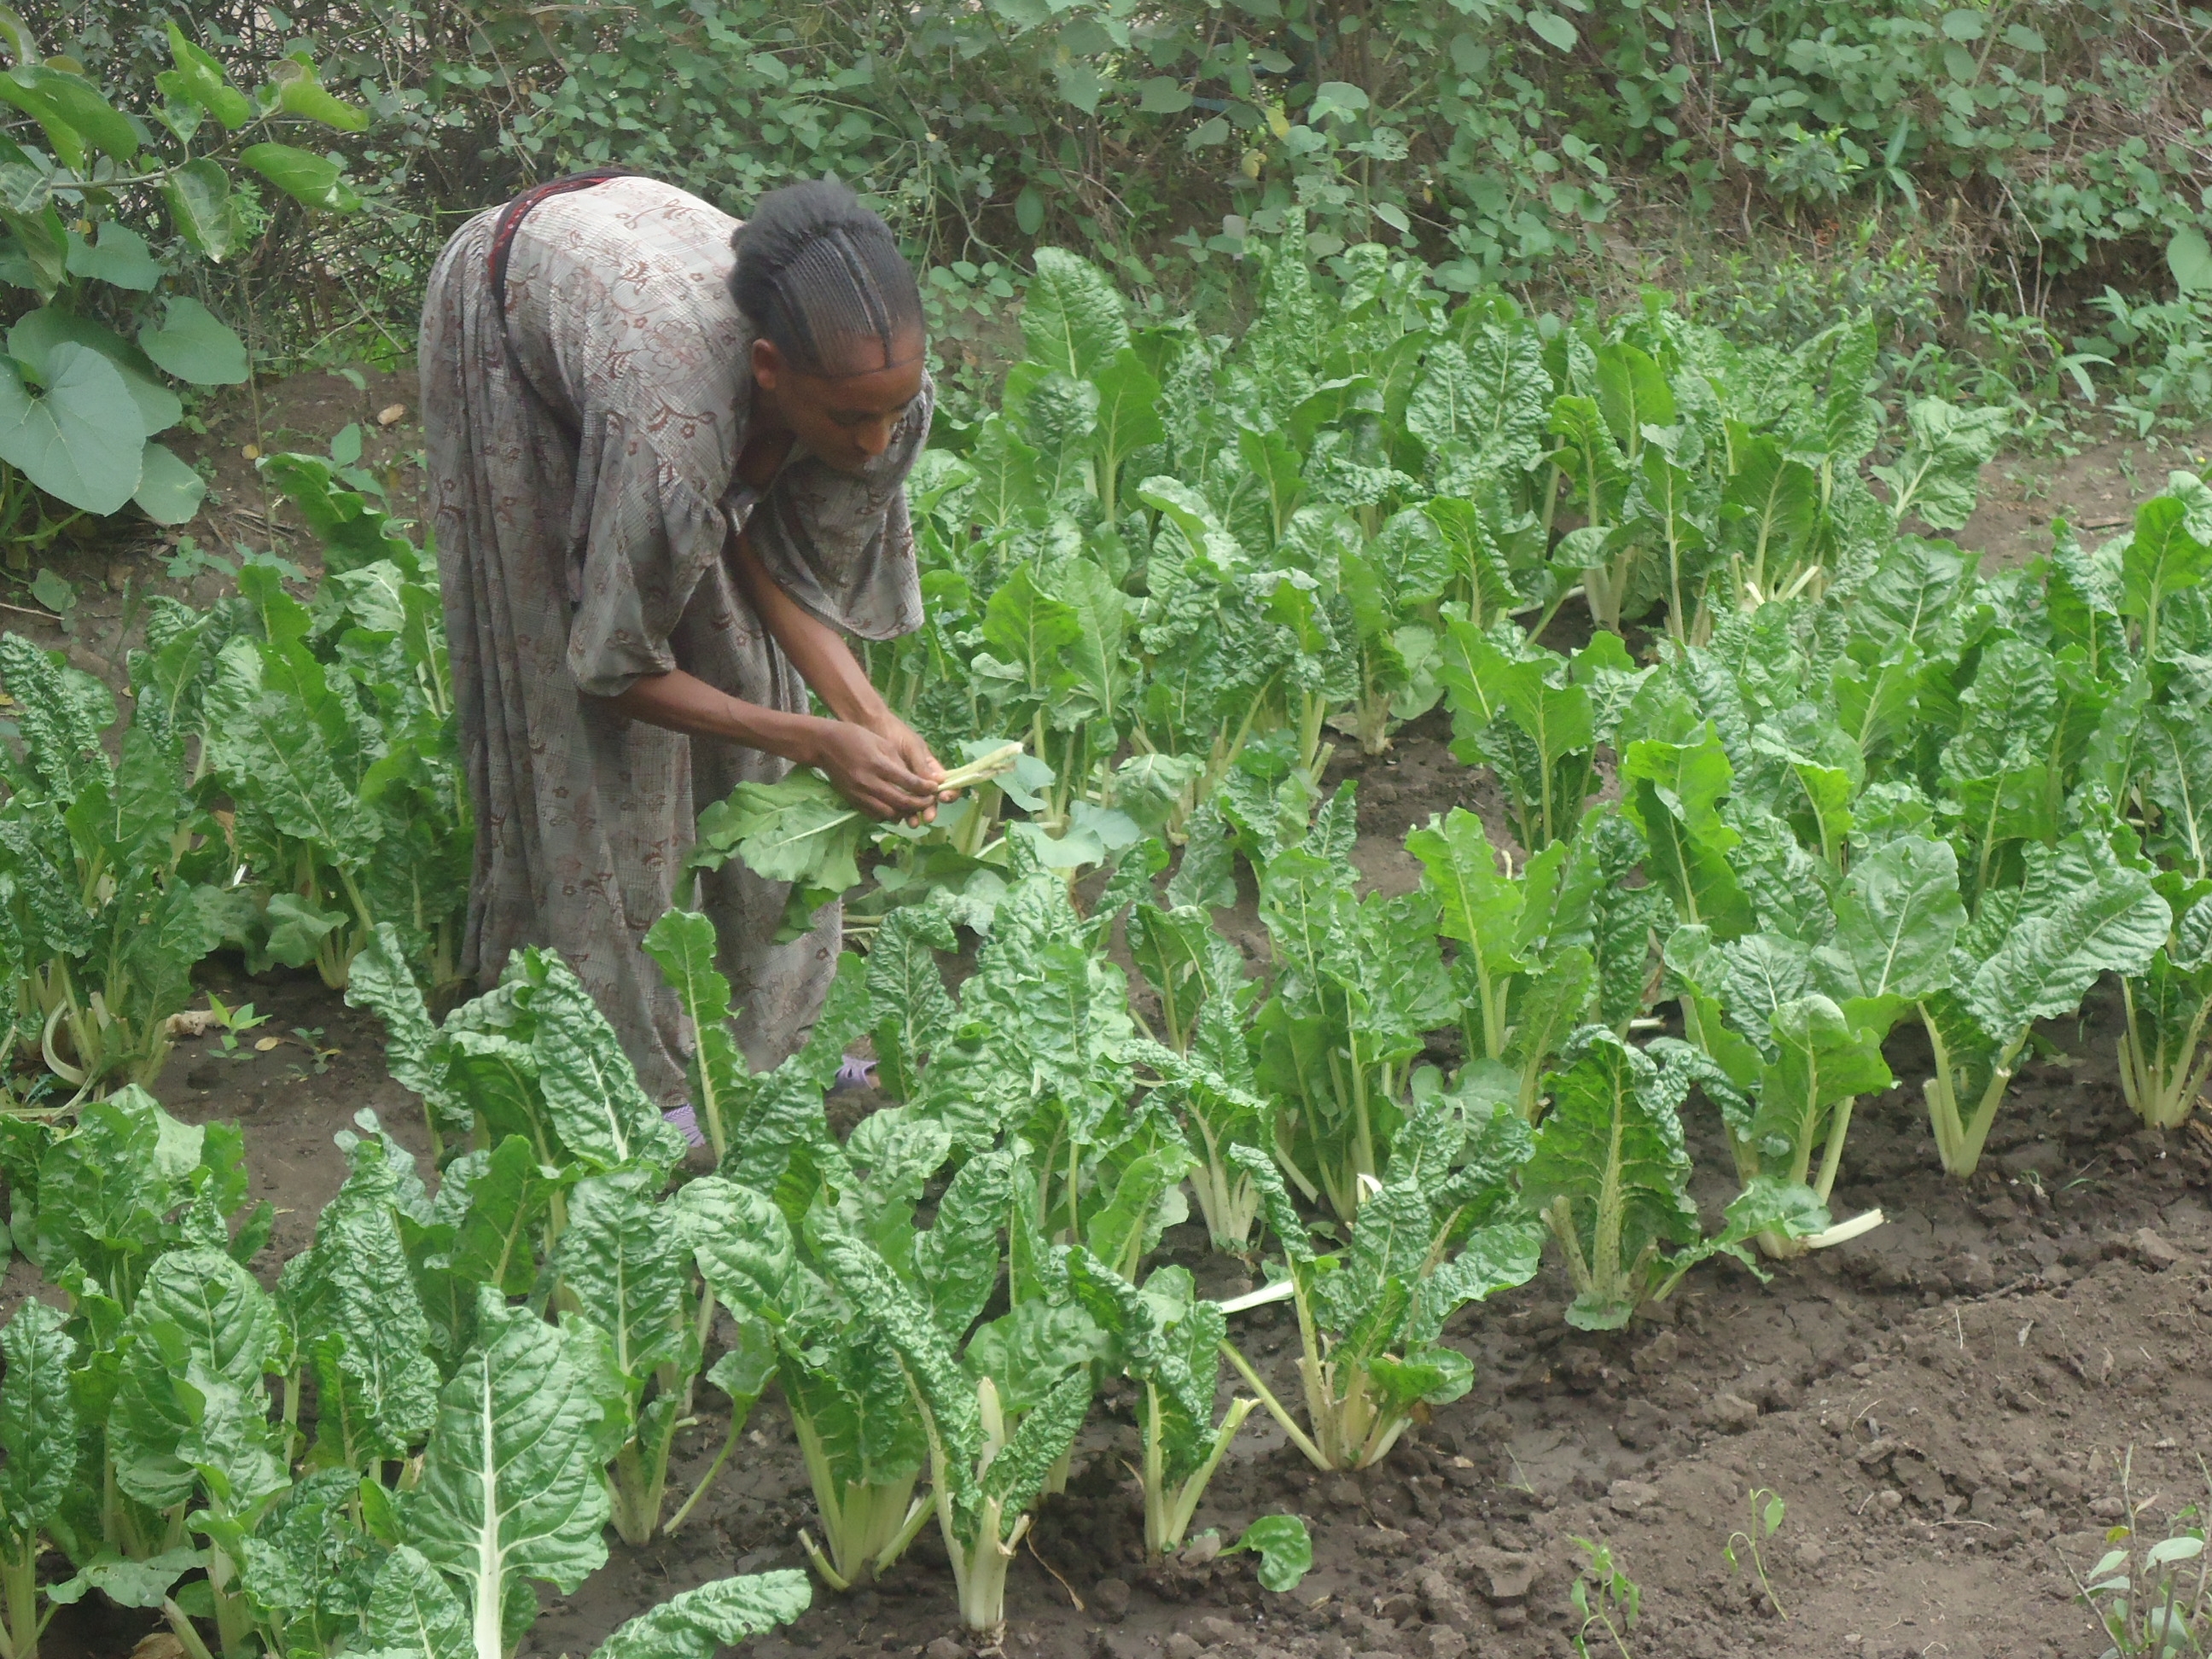 A woman picking vegetables in her vegetable plot